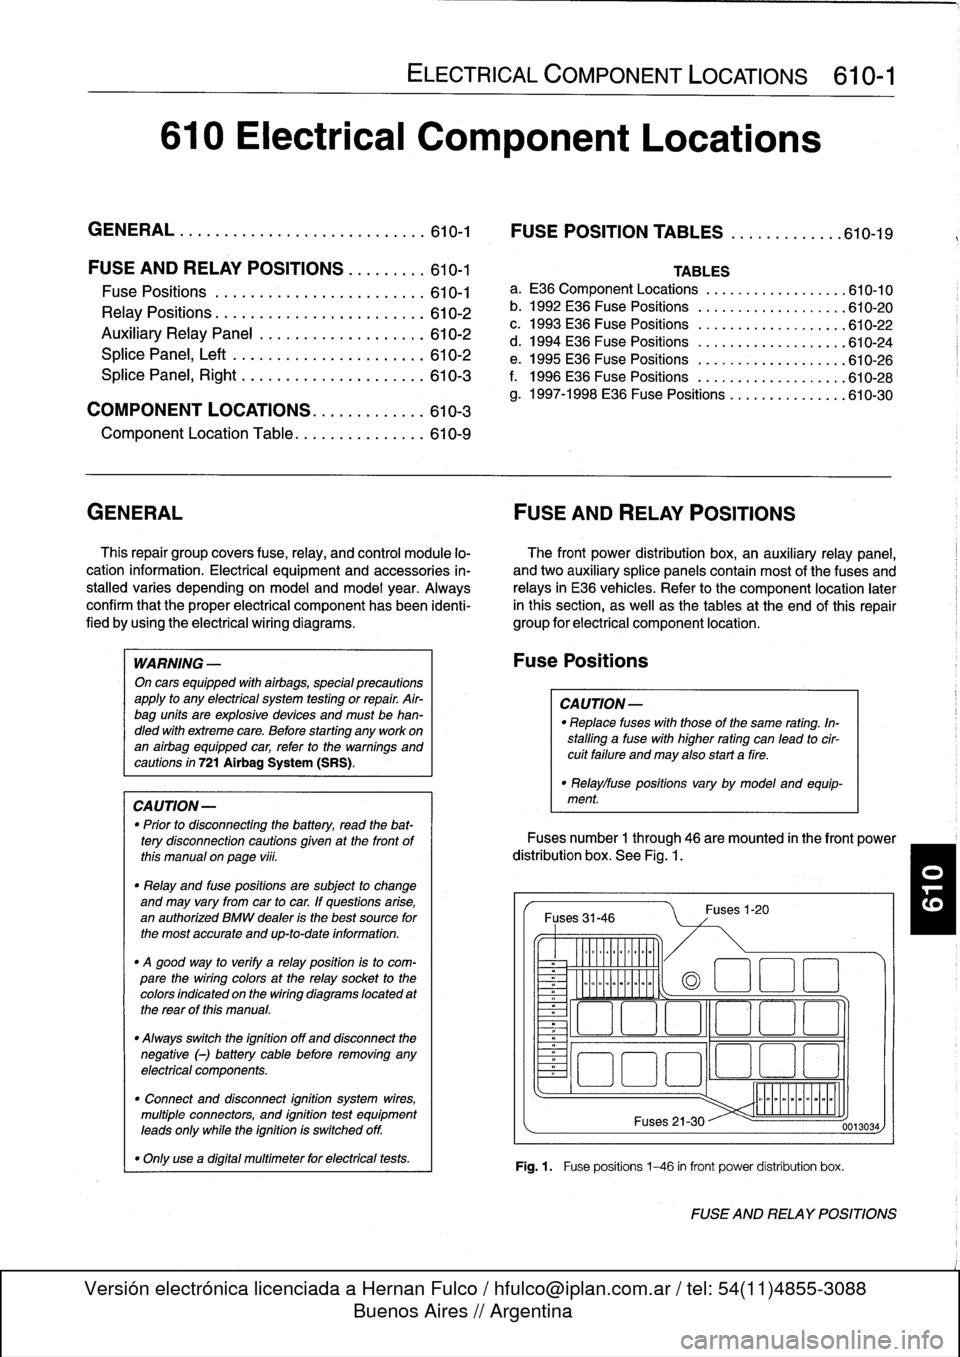 BMW 328i 1995 E36 Workshop Manual 
610
Electrical
Component
Locations

GENERAL
...........
.
.
.
.
.
.
.
.
.
........
610-1

	

FOSE
POSITION
TABLES
..
.
.
.
.
.
.....
.
610-19

FUSE
AND
RELAY
POSITIONS
.
...
.
.
.
.
.
610-1

Fuse
Pos